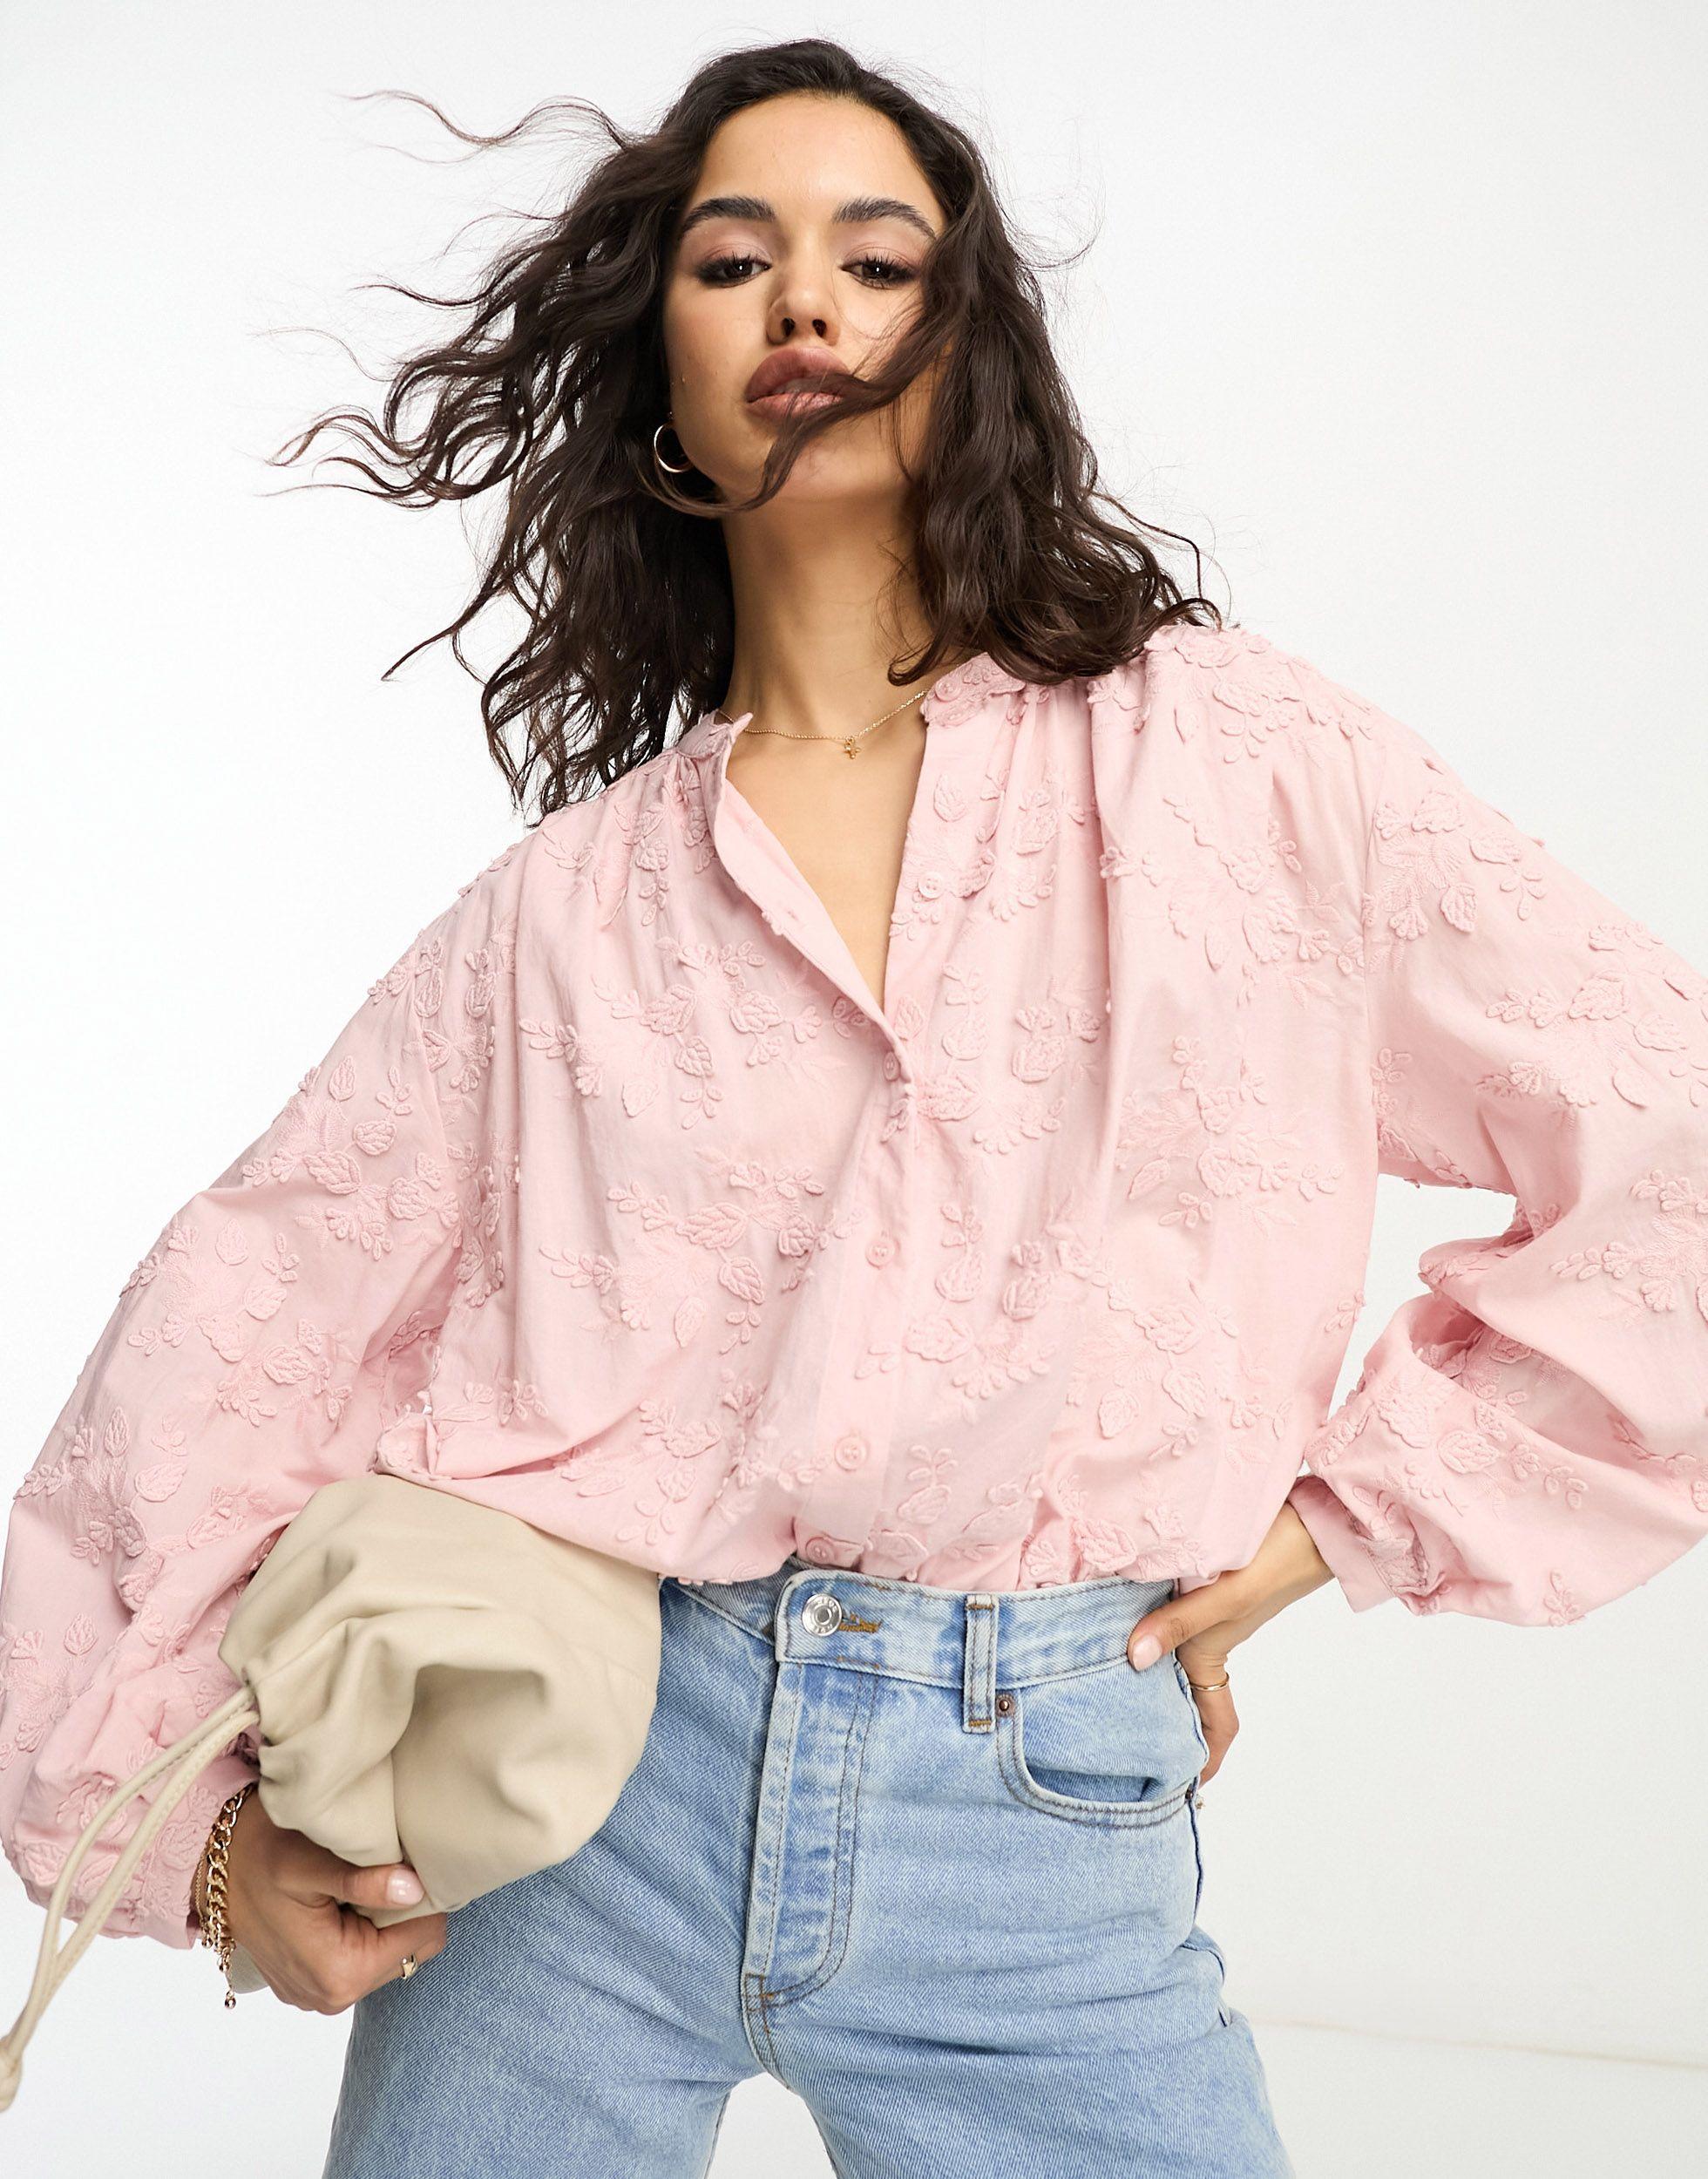 & Other Stories Floral Embroidered Blouse in Pink | Lyst